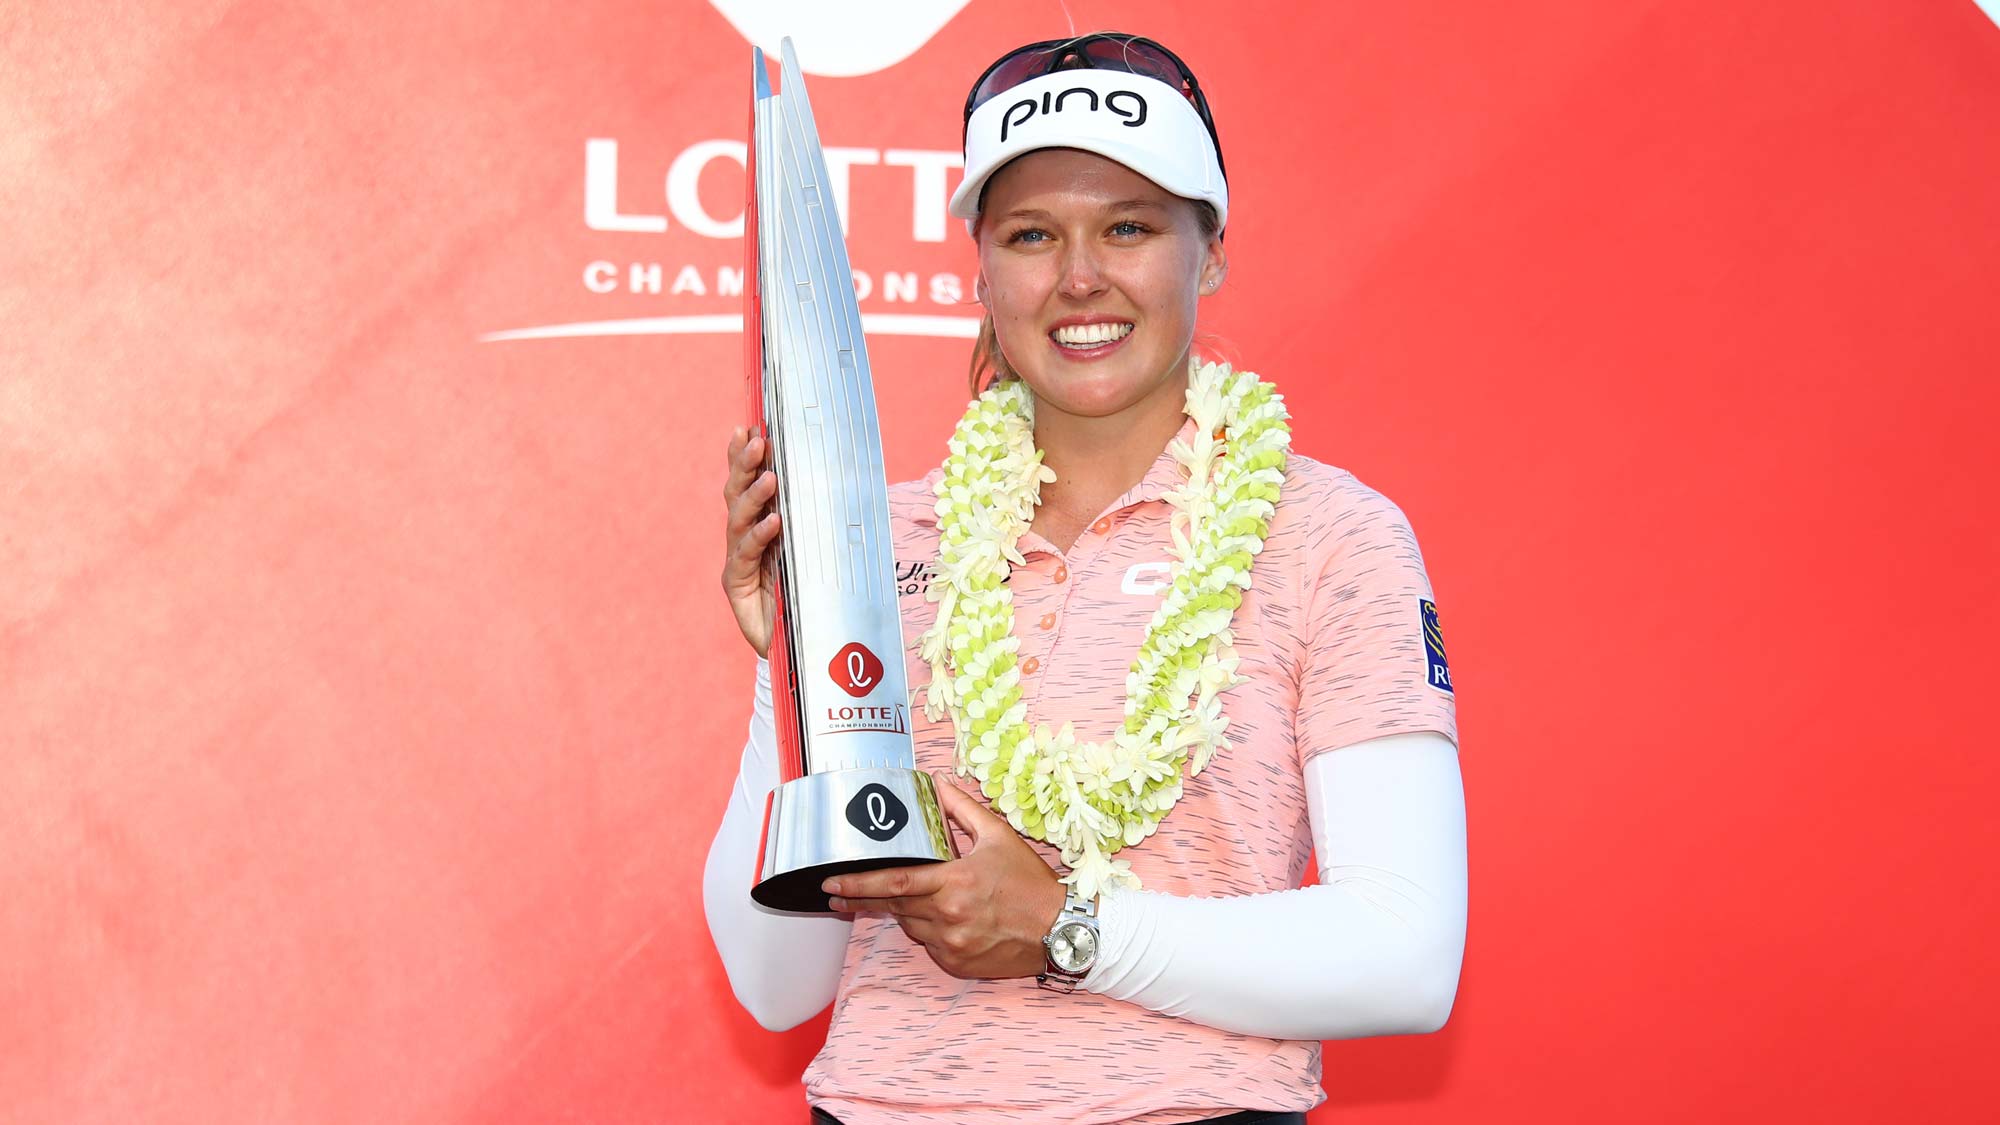 Brooke Henderson has her #BagsPacked for the 2020 Diamond Resorts Tournament of Champions after her victory at the 2019 LOTTE Championship 